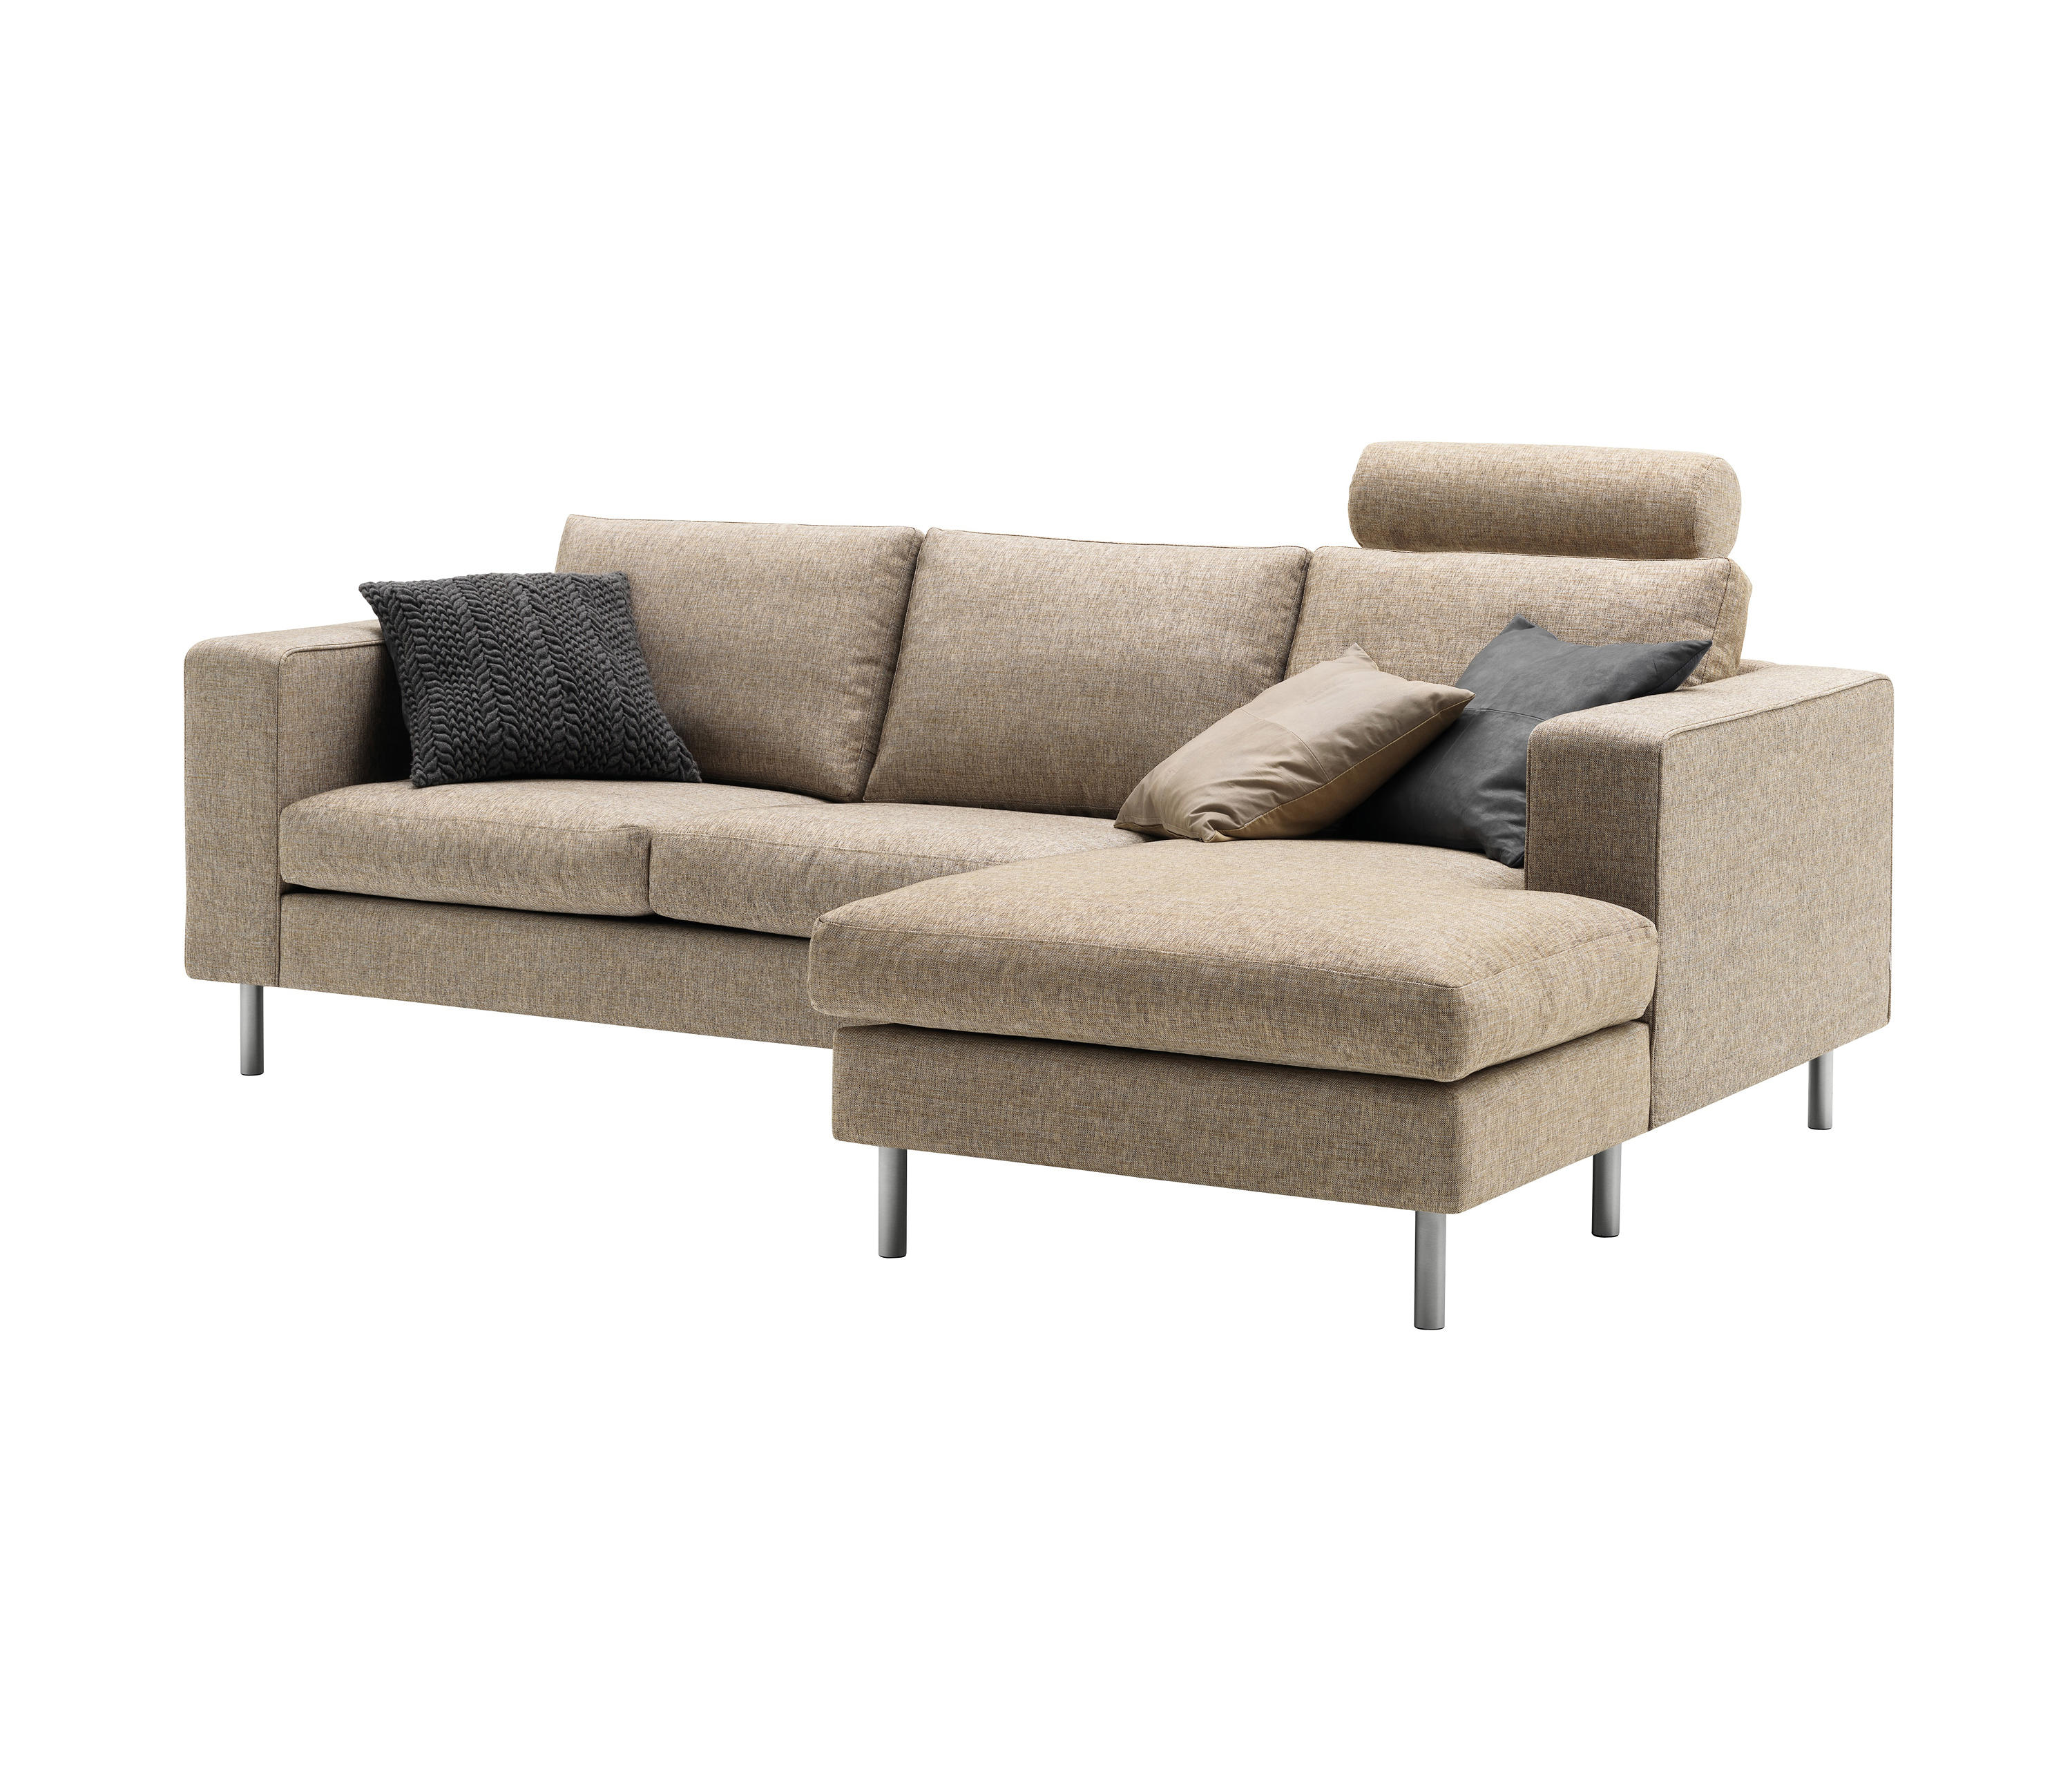 Indivi Sofa with resting unit | Architonic